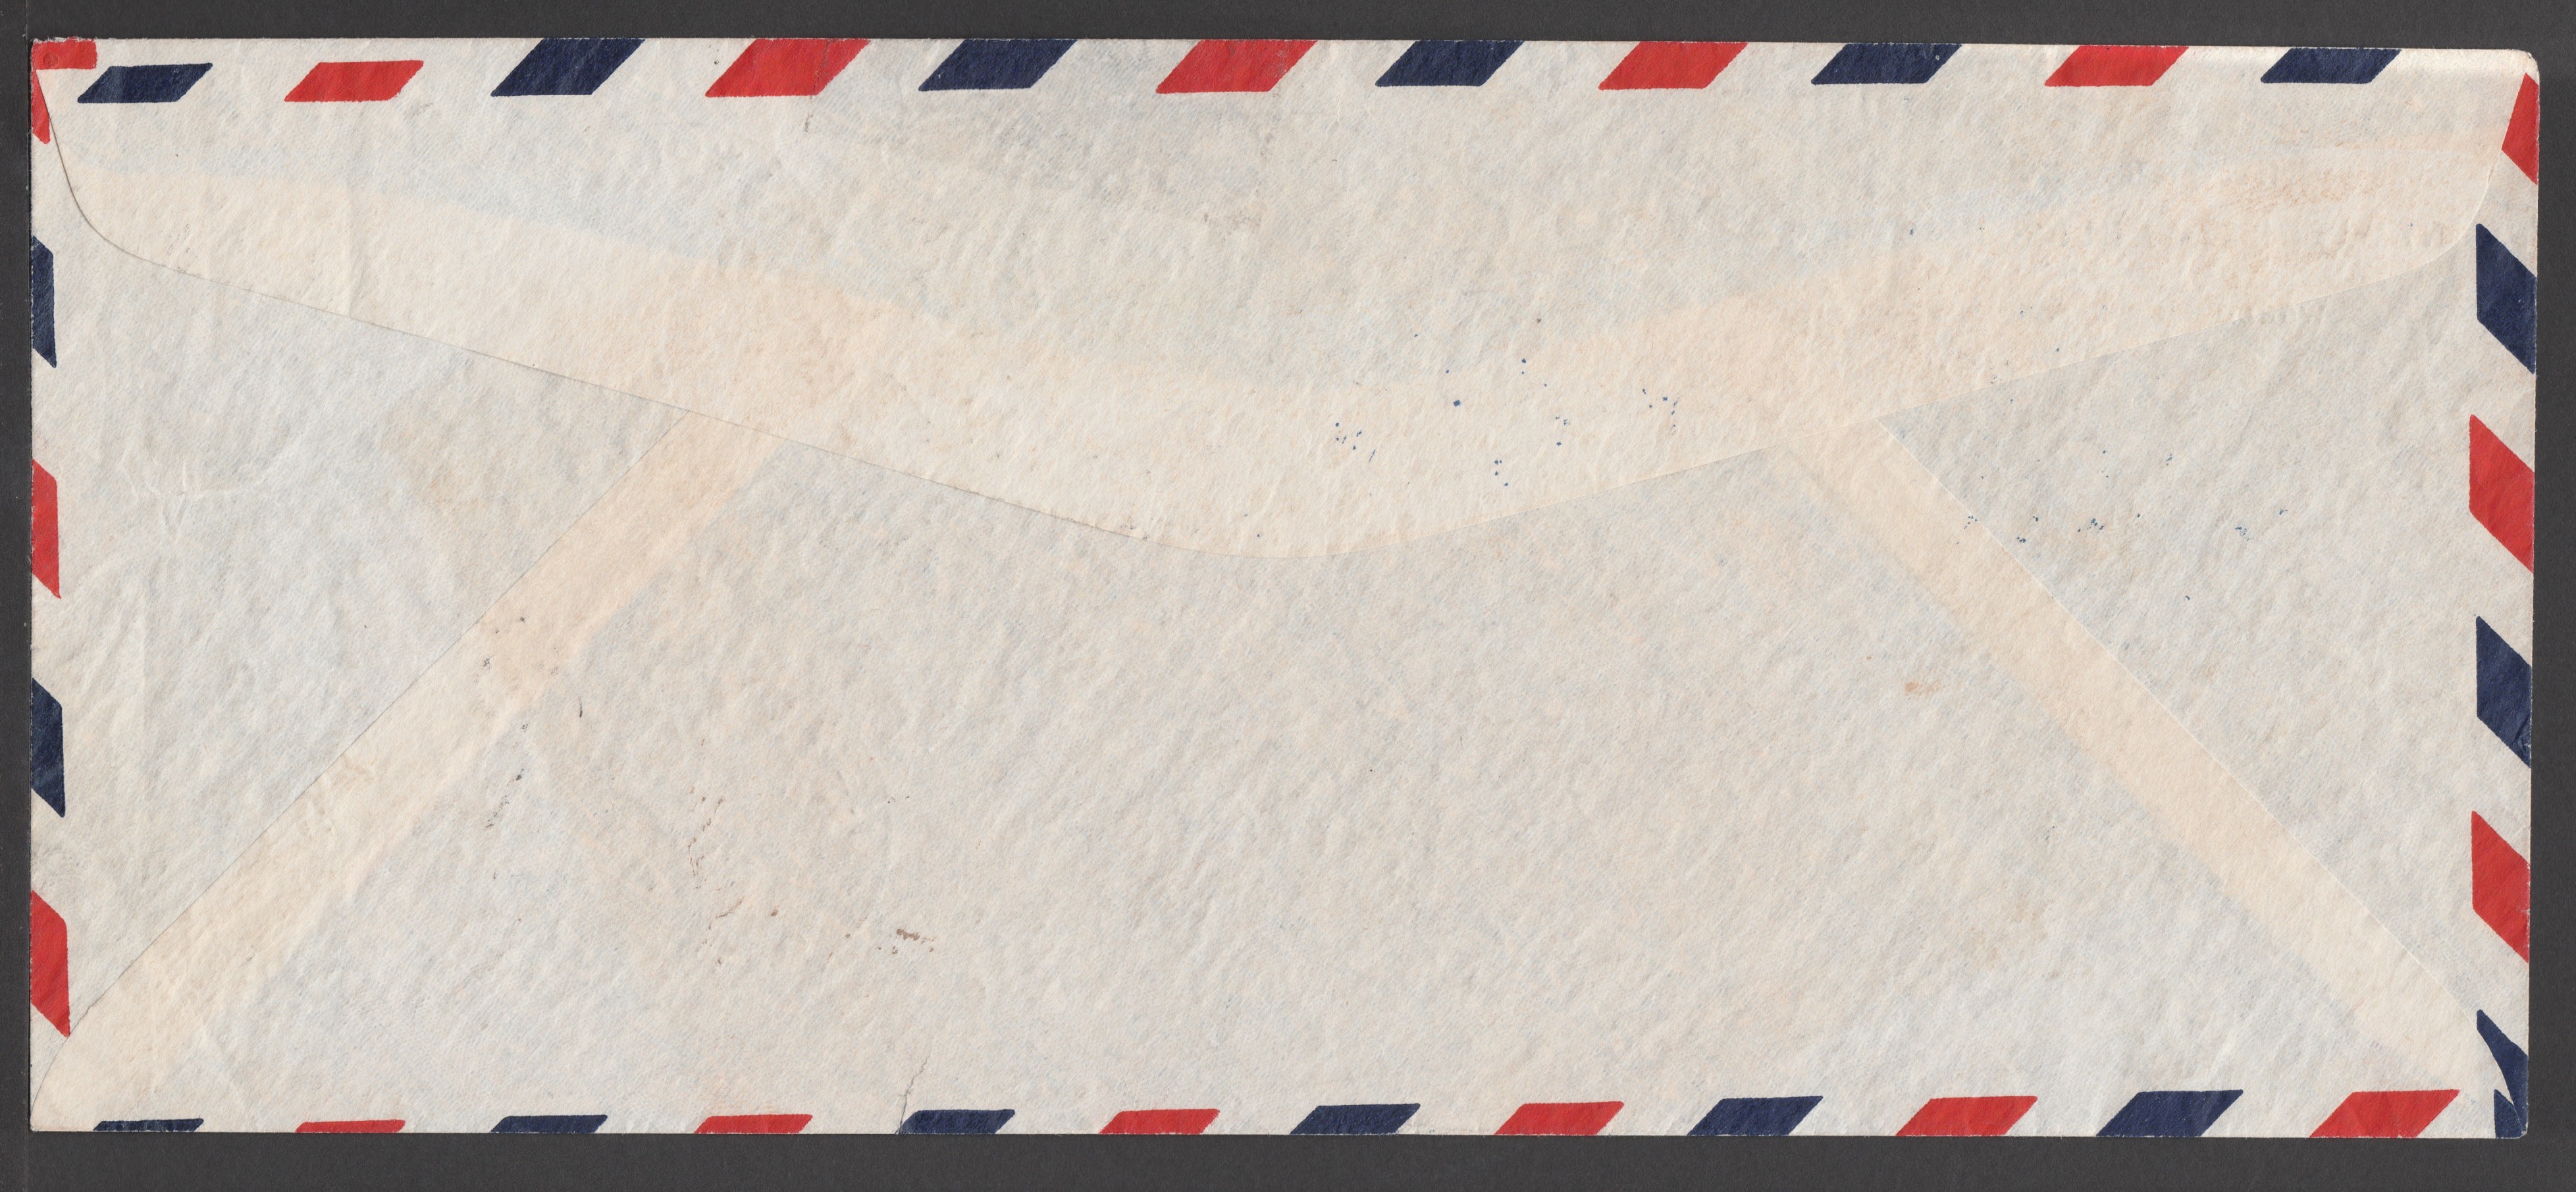 Airmails - Russia / USA / France 1938 - Image 2 of 5